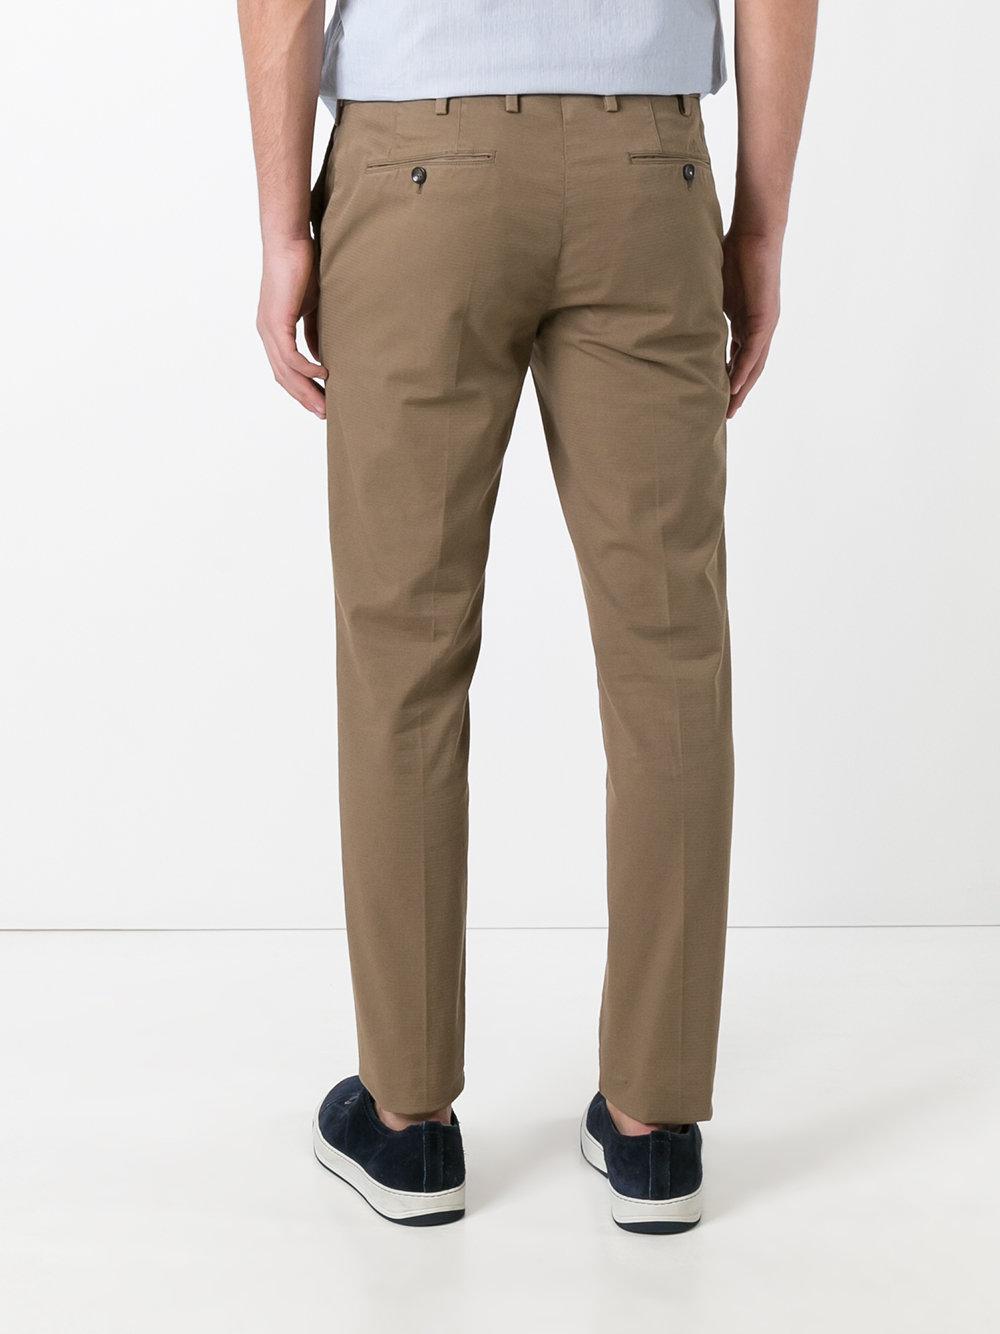 Lyst - Pt01 Classic Chinos in Brown for Men